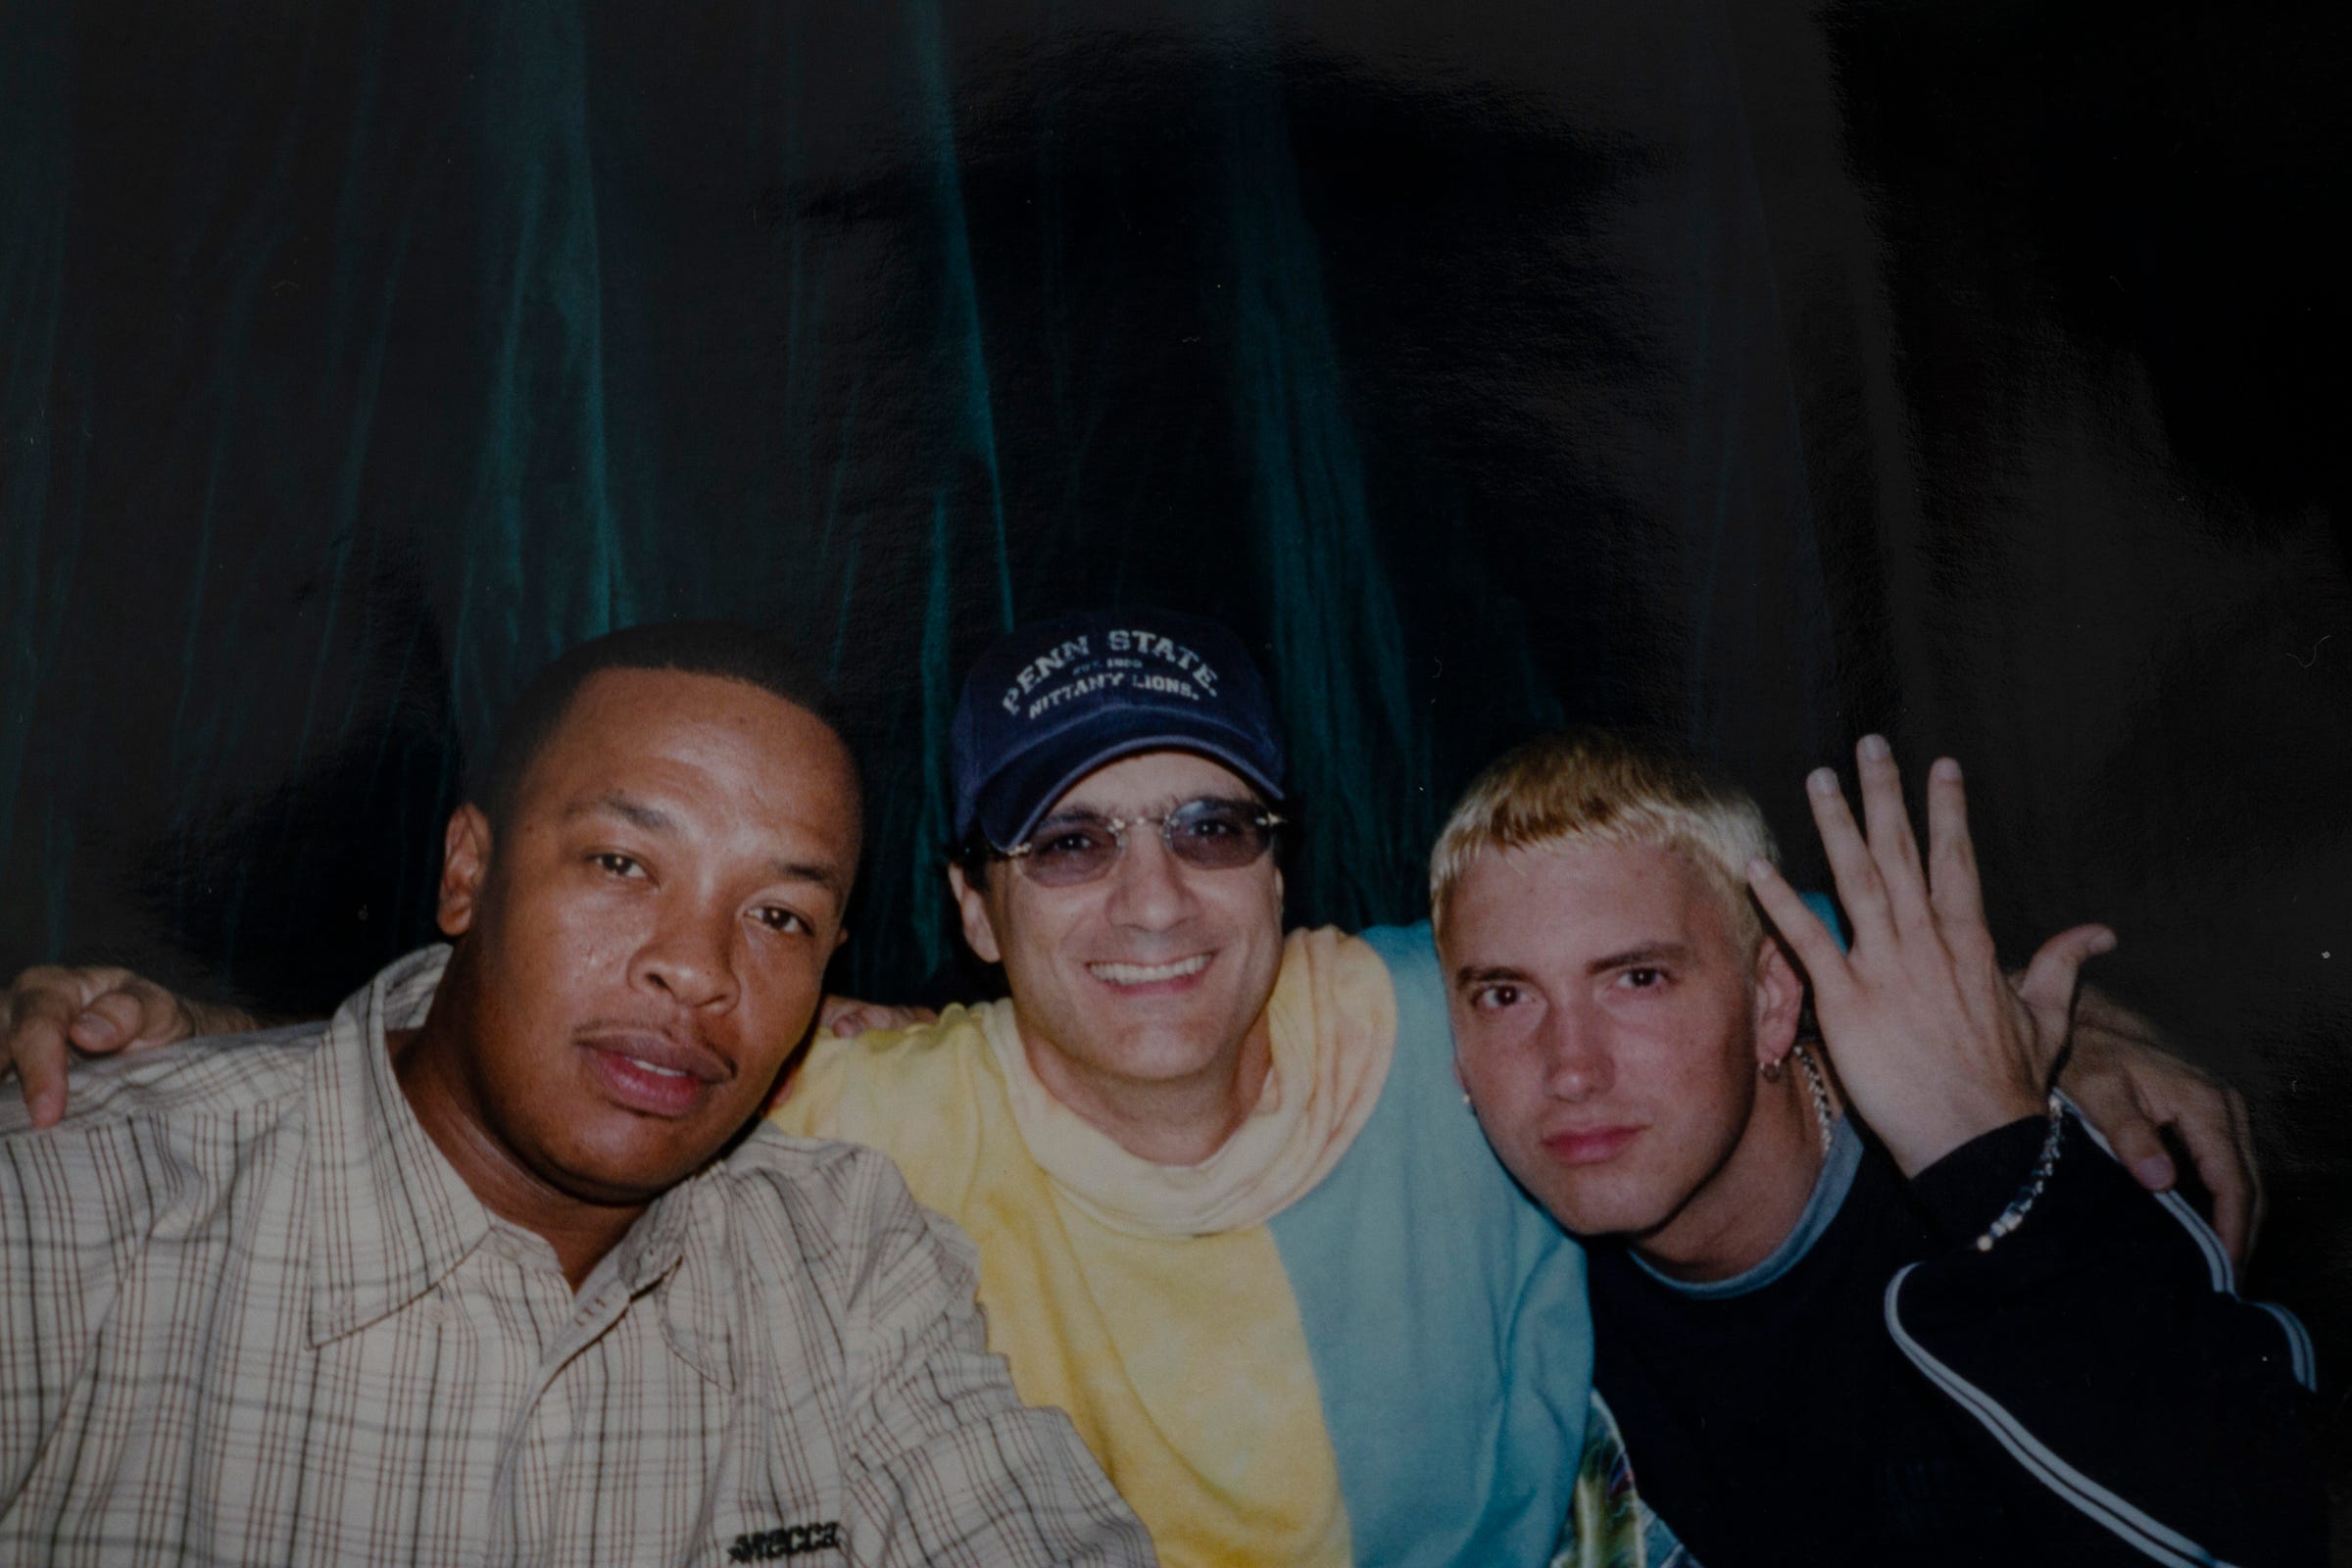 Dr. Dre, Jimmy Iovine and Eminem pose for a snapshot during a party in 1999.